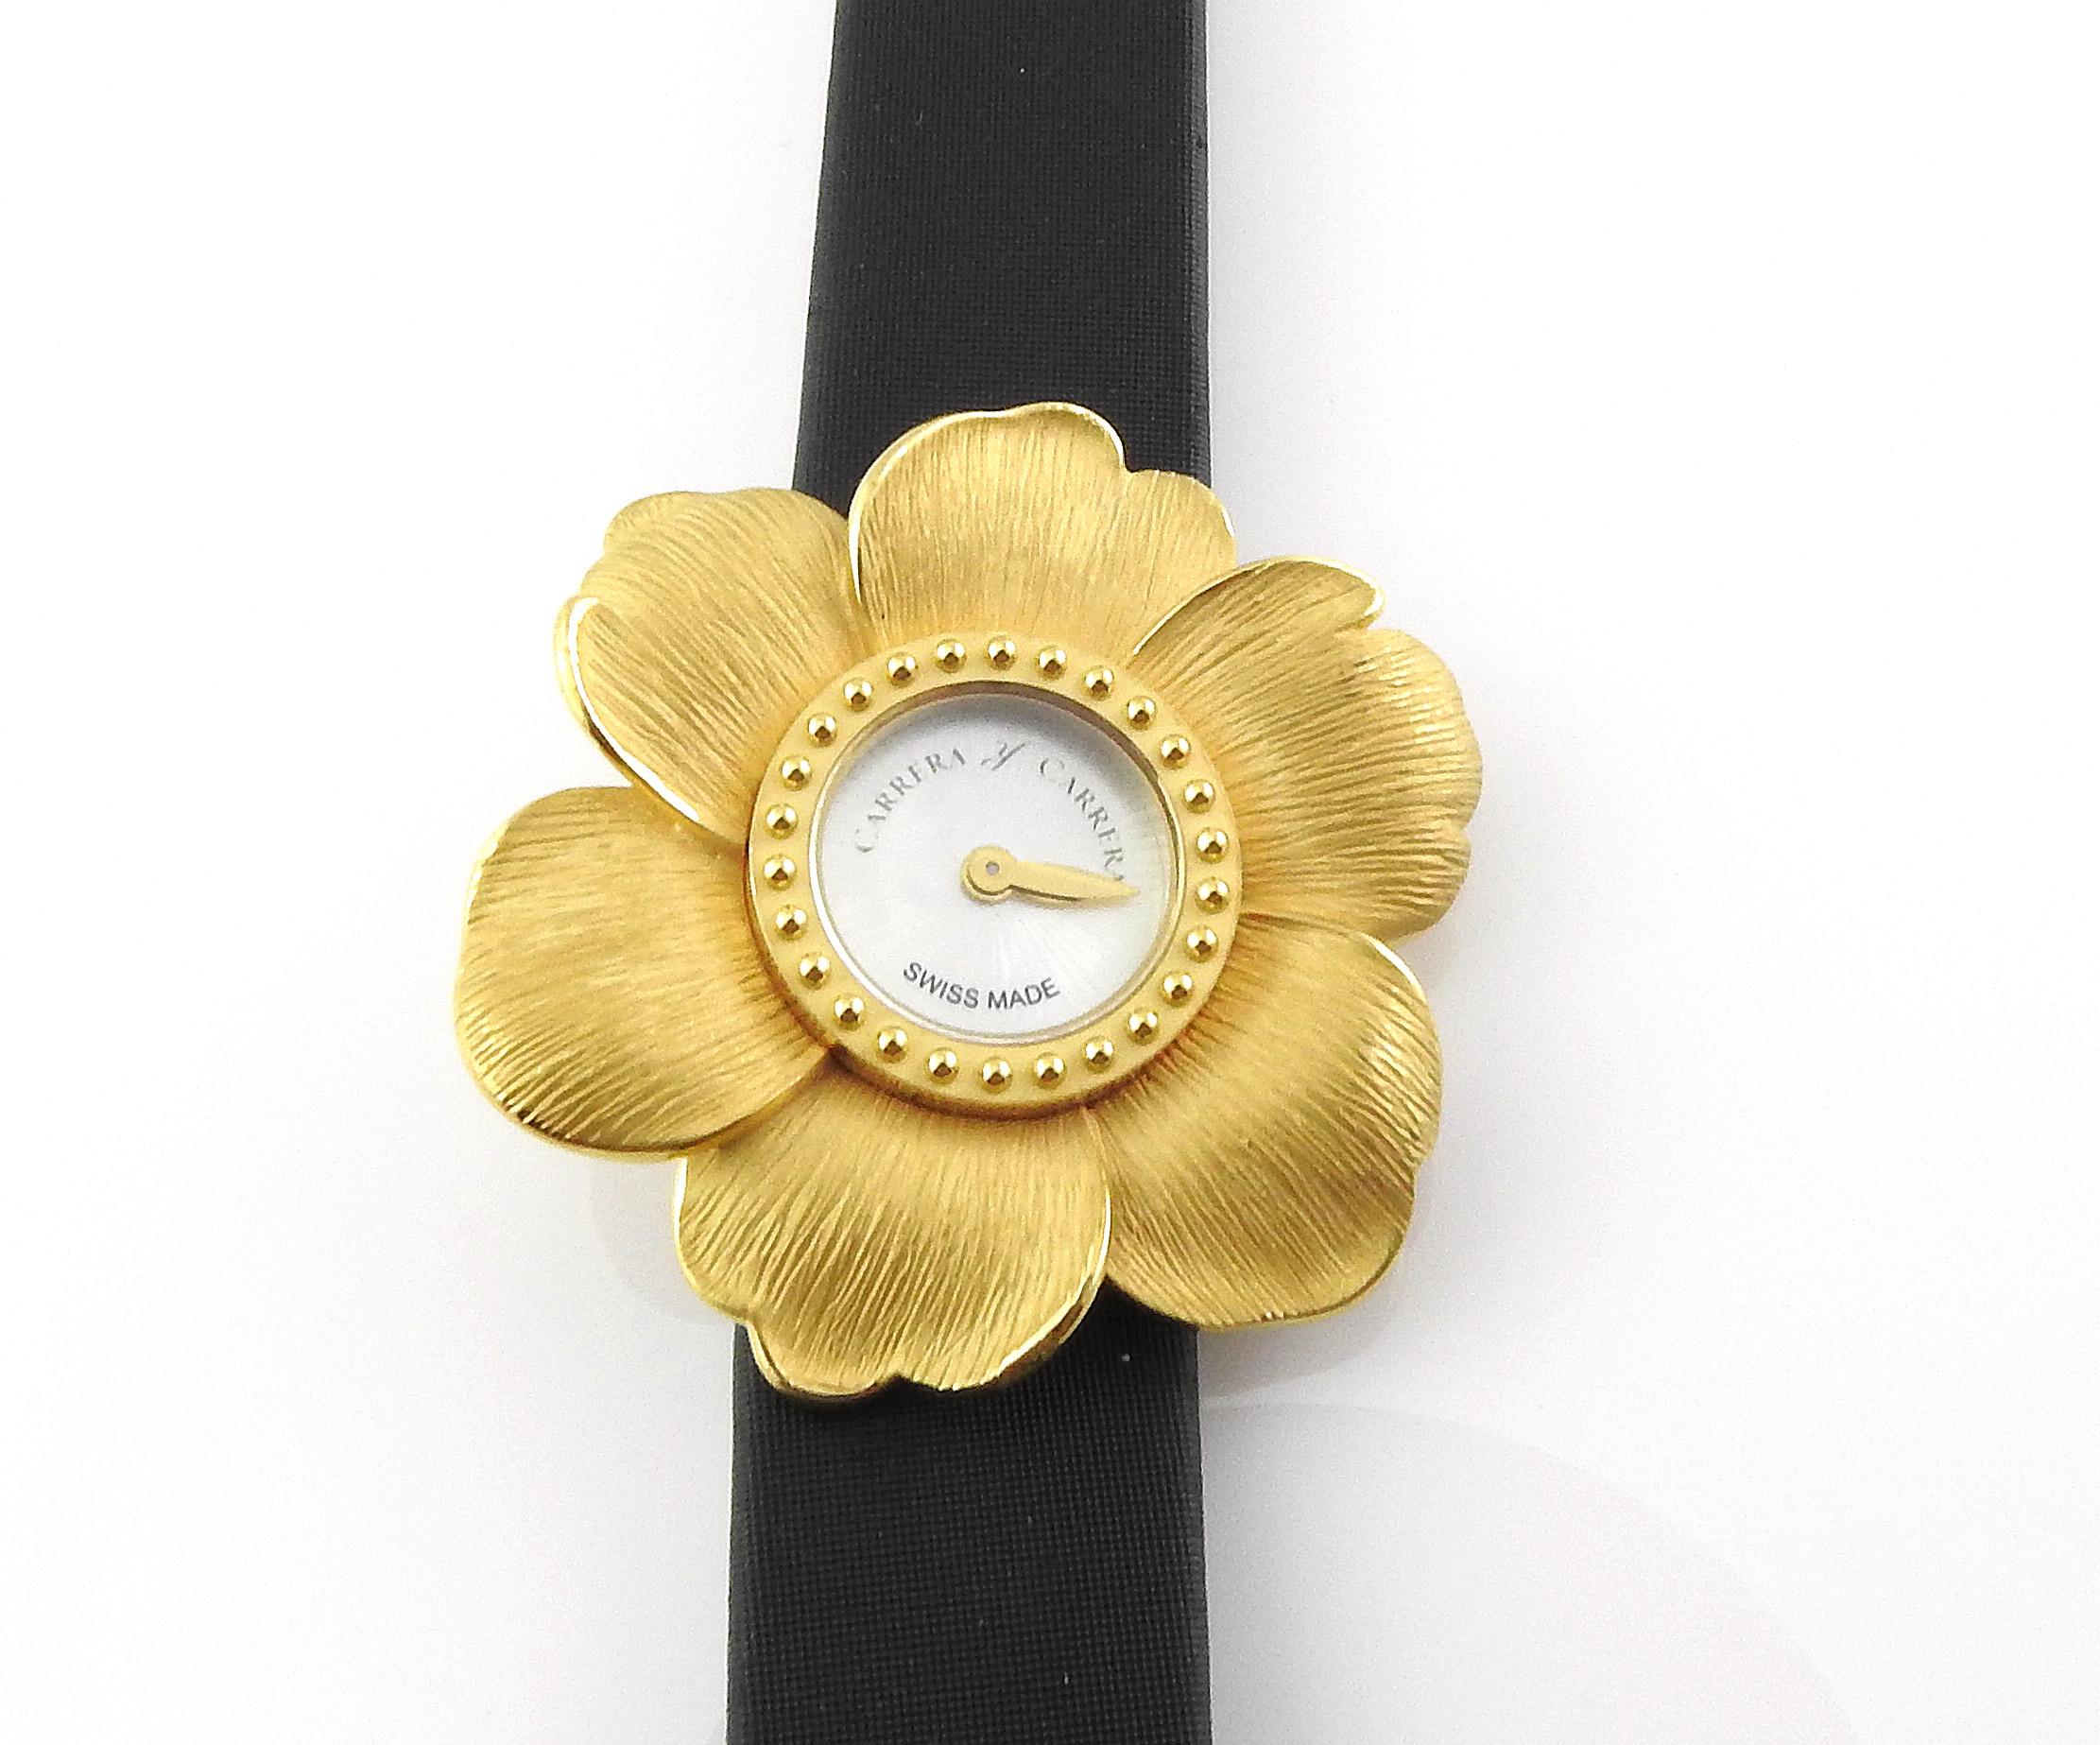 Carrera Y Carrera 18K Yellow Gold Ladies Gardenia Watch

Model 1000-00218

Case is approx. 37.5 mm in diameter

18K Yellow Gold Case and Buckle

Black Satin Band  - some wear to the band as shown in pictures

Guilloche Mother of Pearl Dial

Quartz